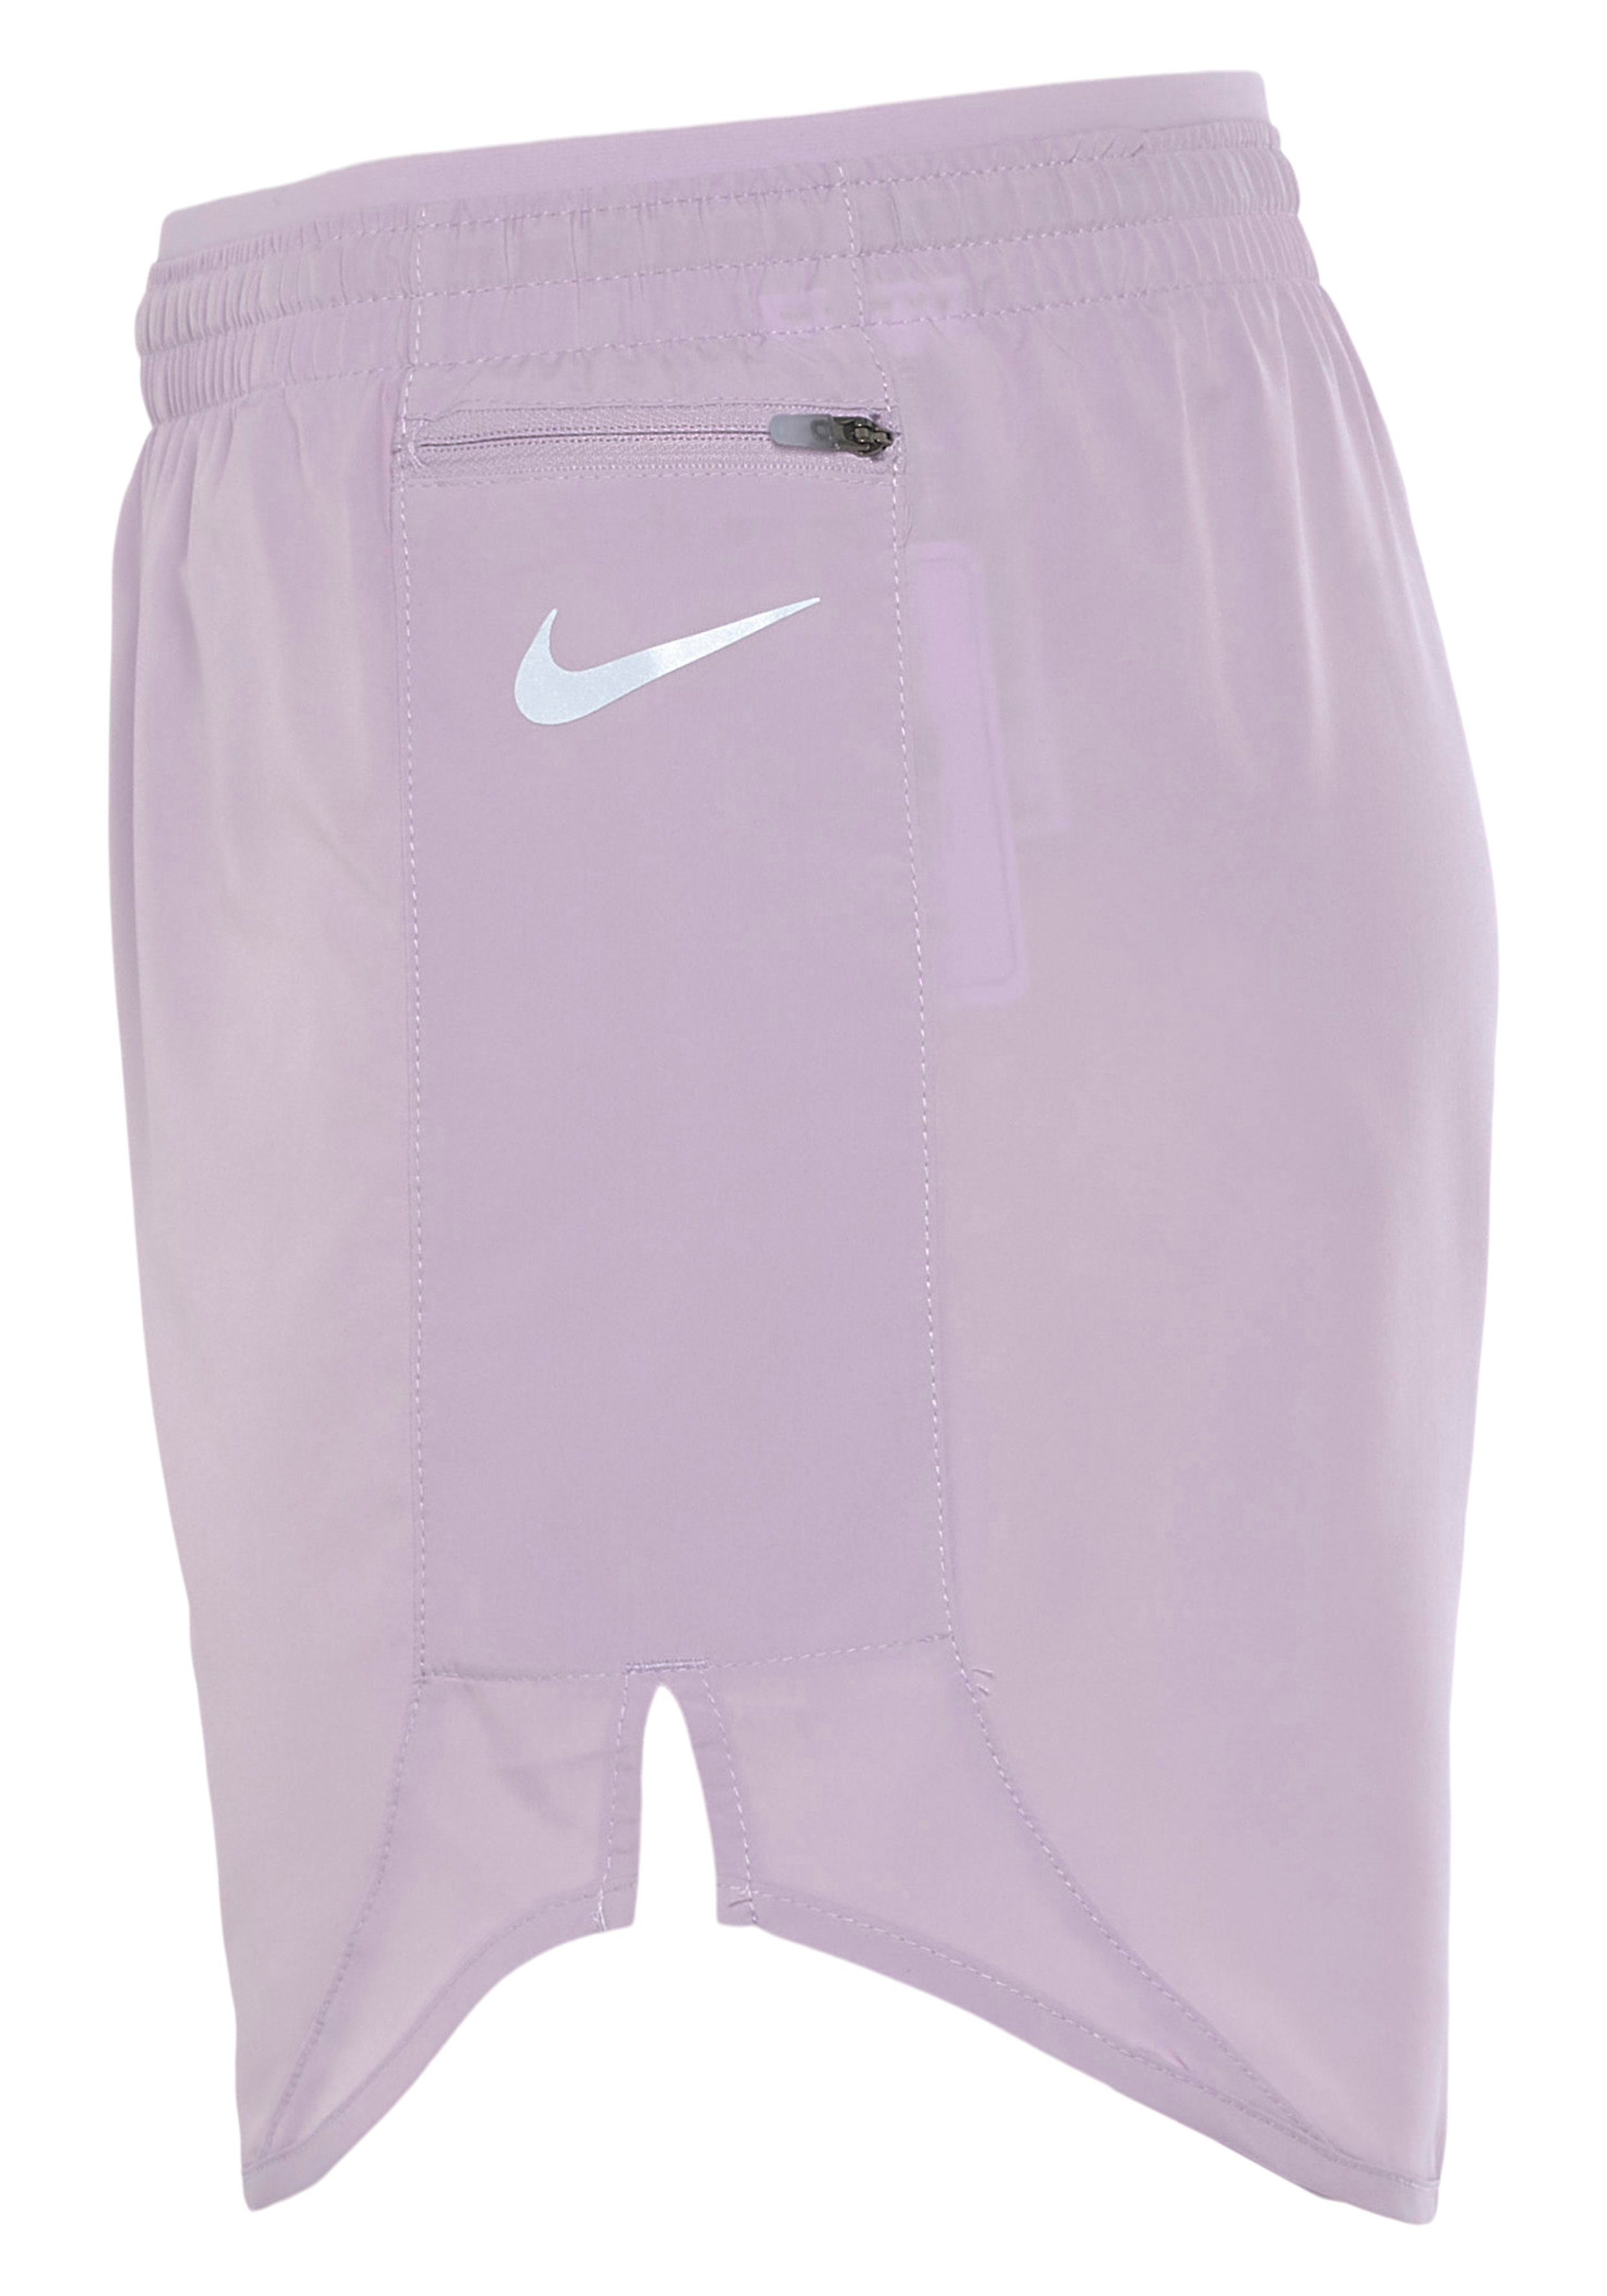 Shorts Women's Luxe Nike Running Laufshorts Tempo DOLL/DOLL/REFLECTIVE SILV